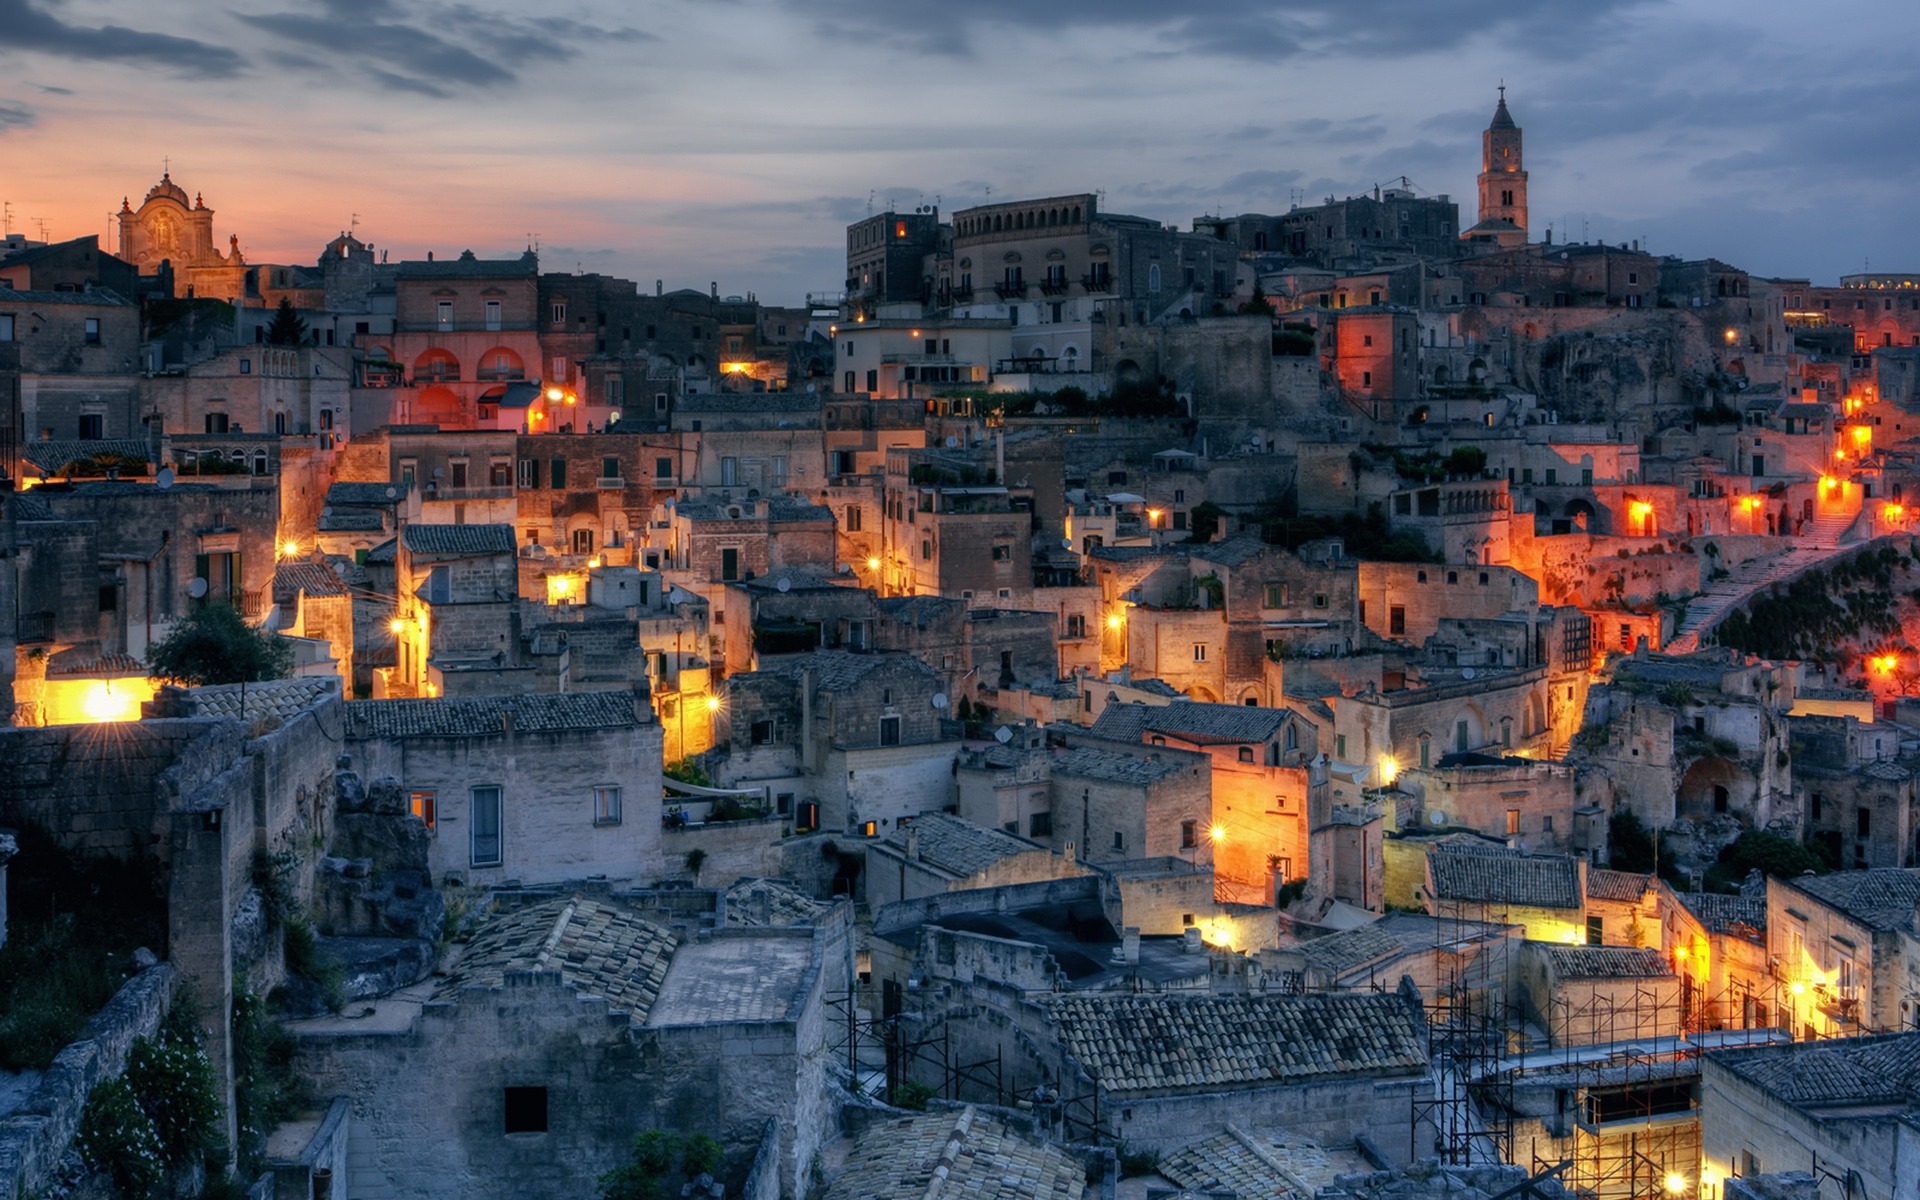 Download wallpaper Matera, Basilicata, city in the rock, old town, UNESCO, Italy for desktop with resolution 1920x1200. High Quality HD picture wallpaper